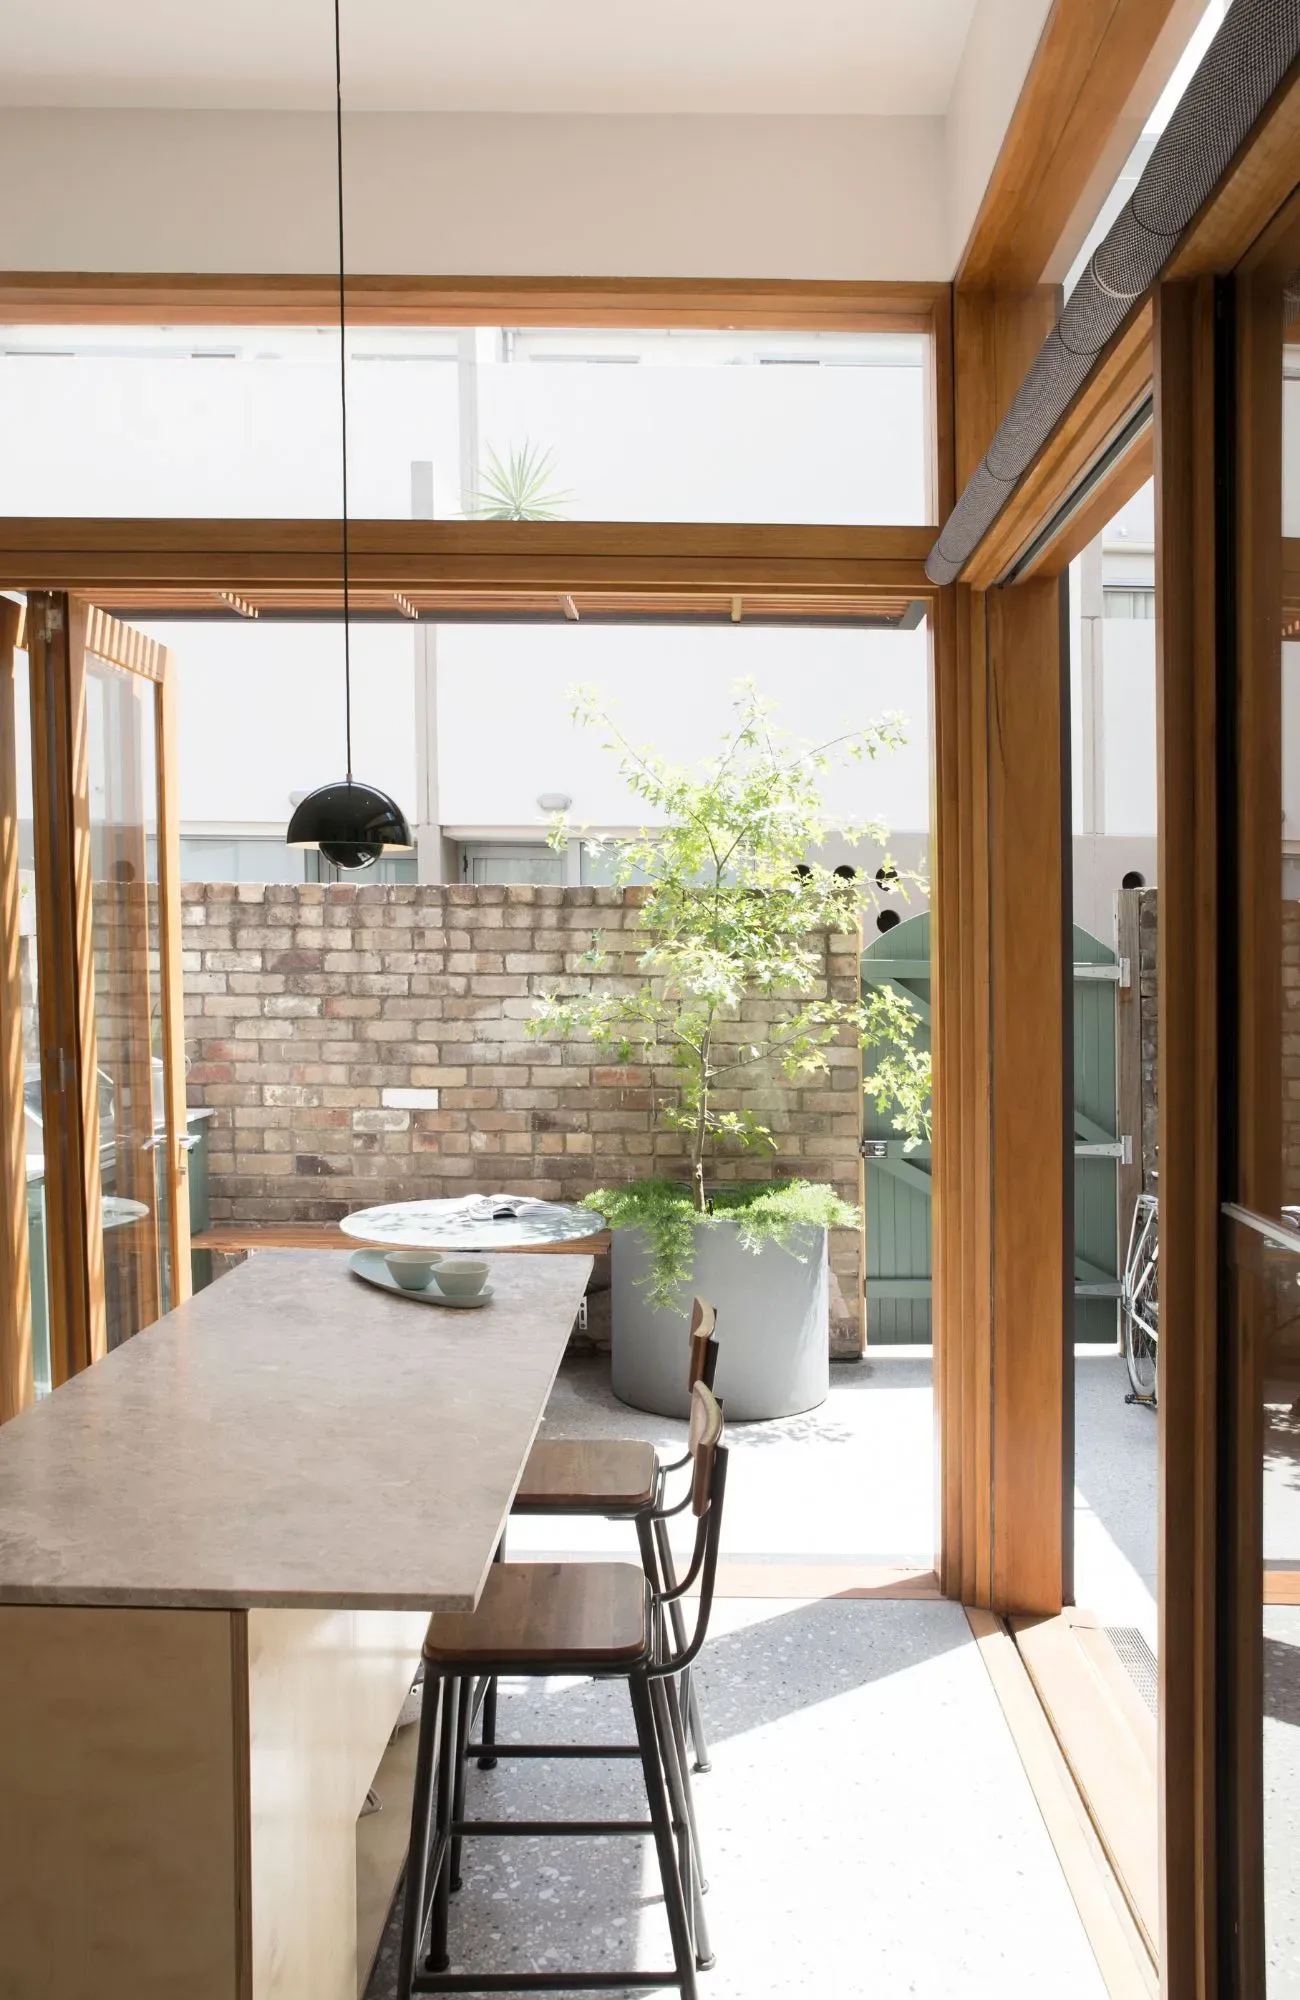 OTC Terrace House by Marker Architecture & Design courtyard and kitchen view